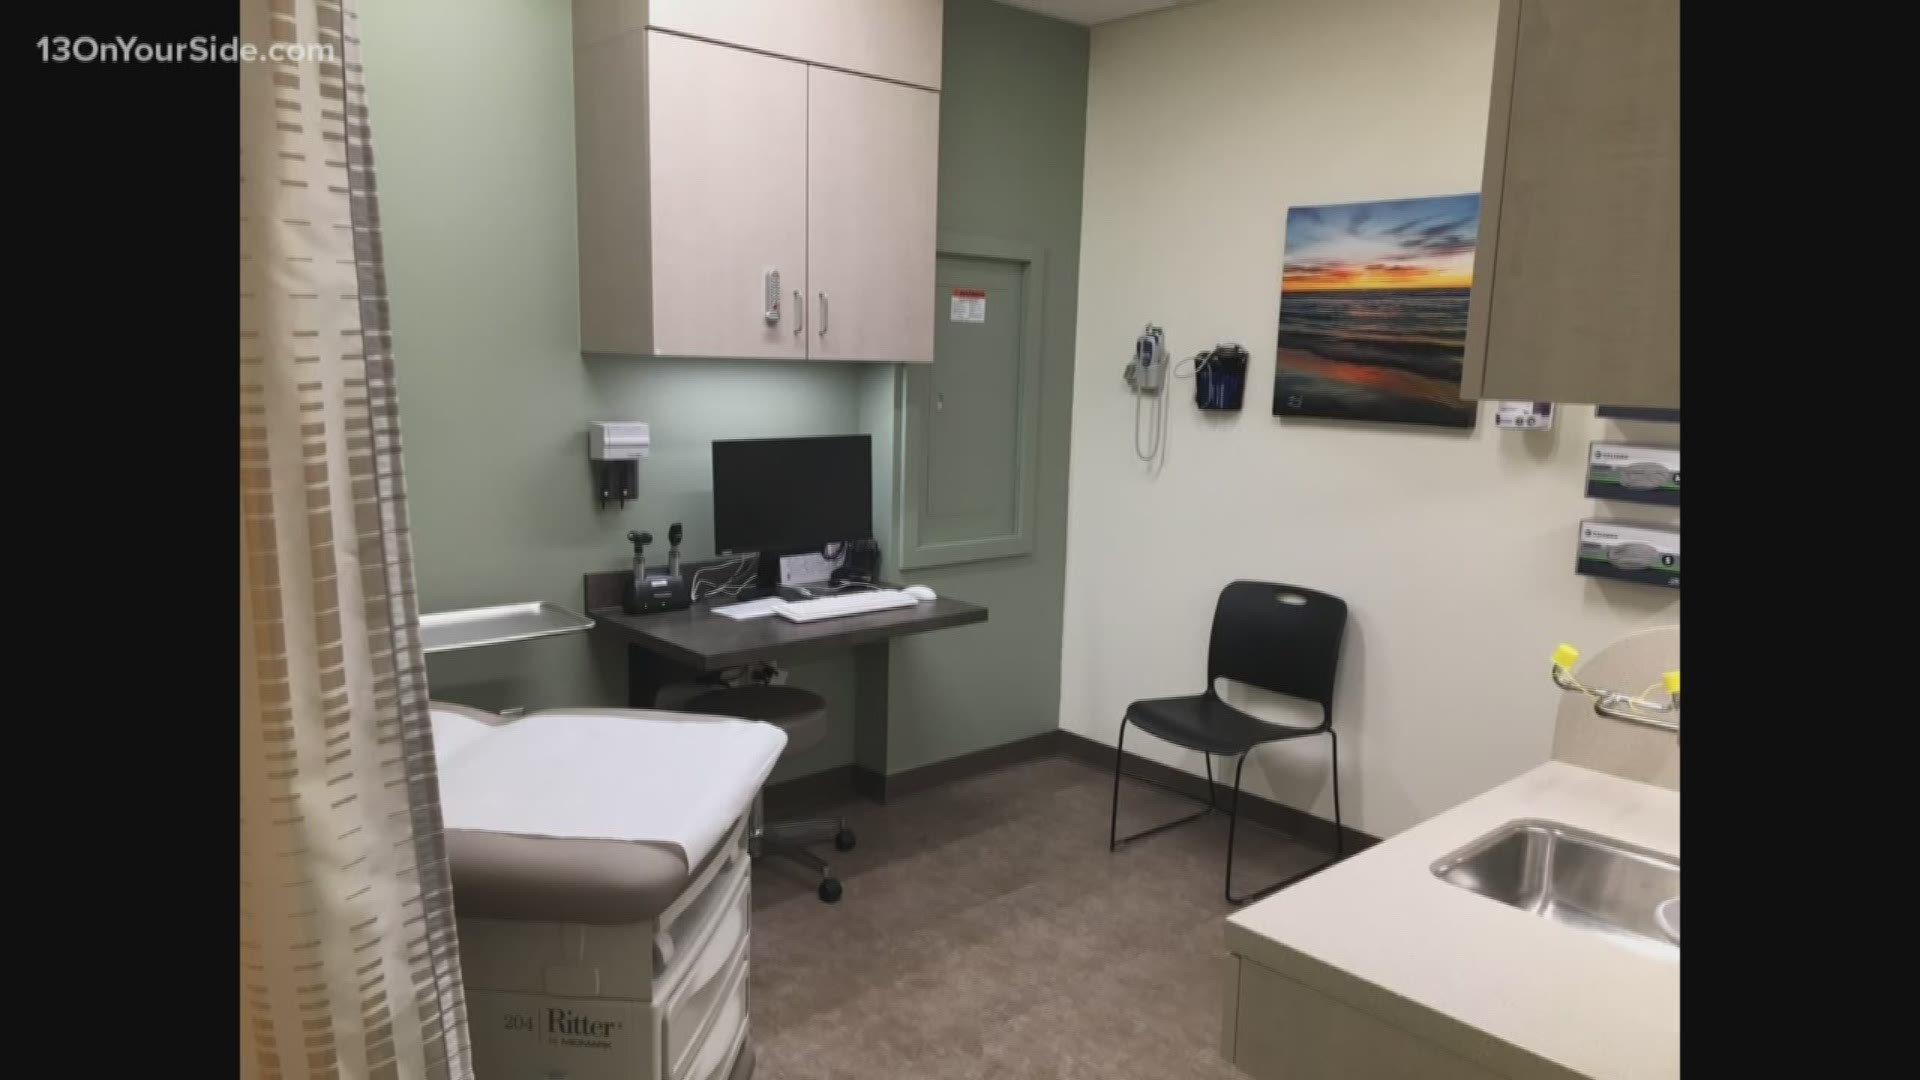 The clinic is the second to be located within a Meijer. Spectrum Health’s first in-store clinic opened last year at the Meijer in Hudsonville.